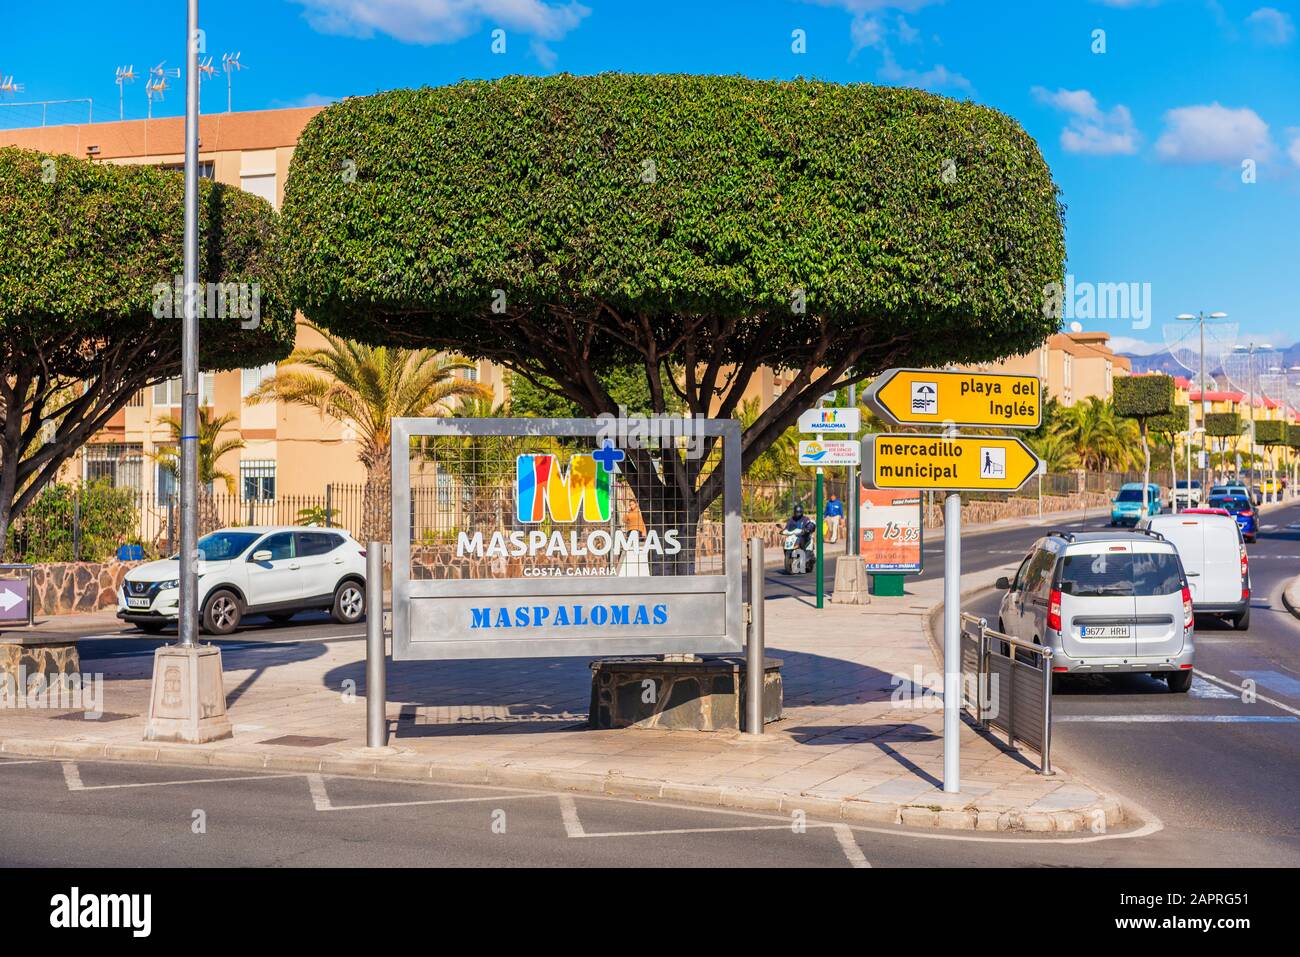 Entrance Sign to Maspalomas, Gran Canaria, Canary Islands, Spain. Maspalomas is located in the south of the island and is a major tourist destination Stock Photo